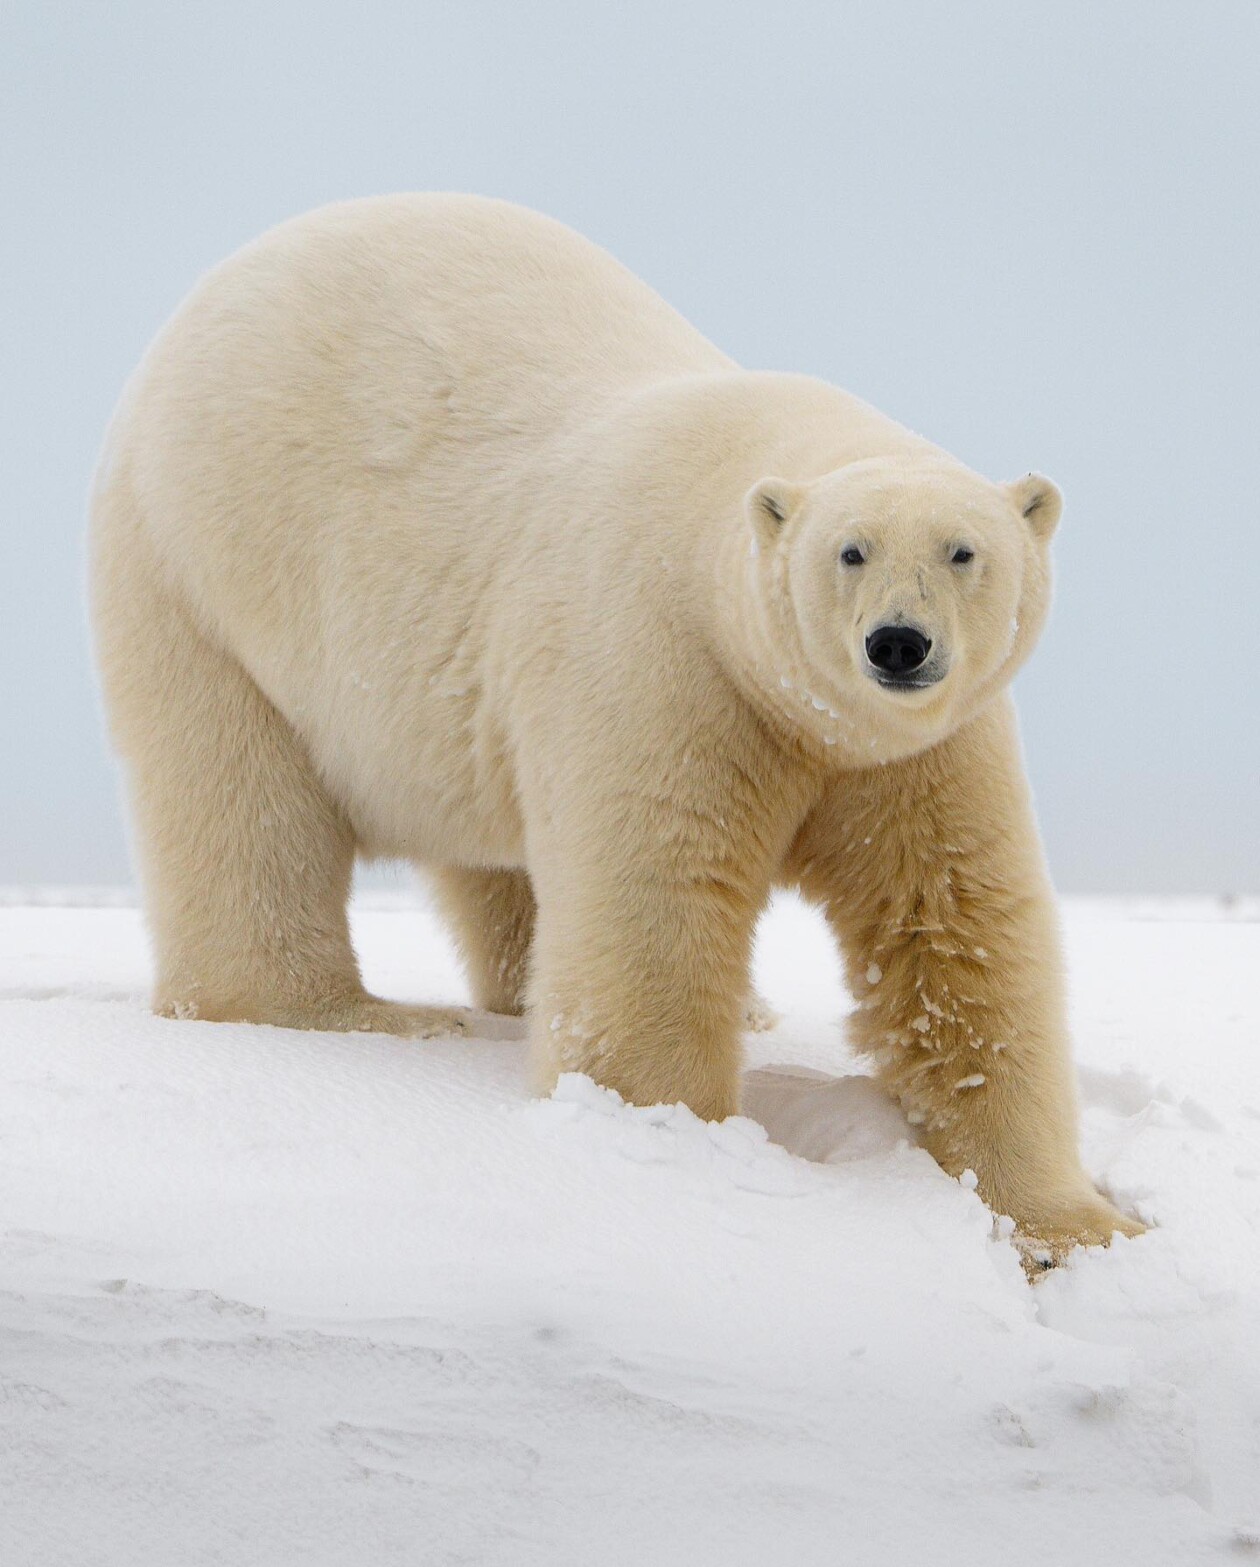 Captivating Pictures Of Arctic Animals By Konsta Punkka (11)